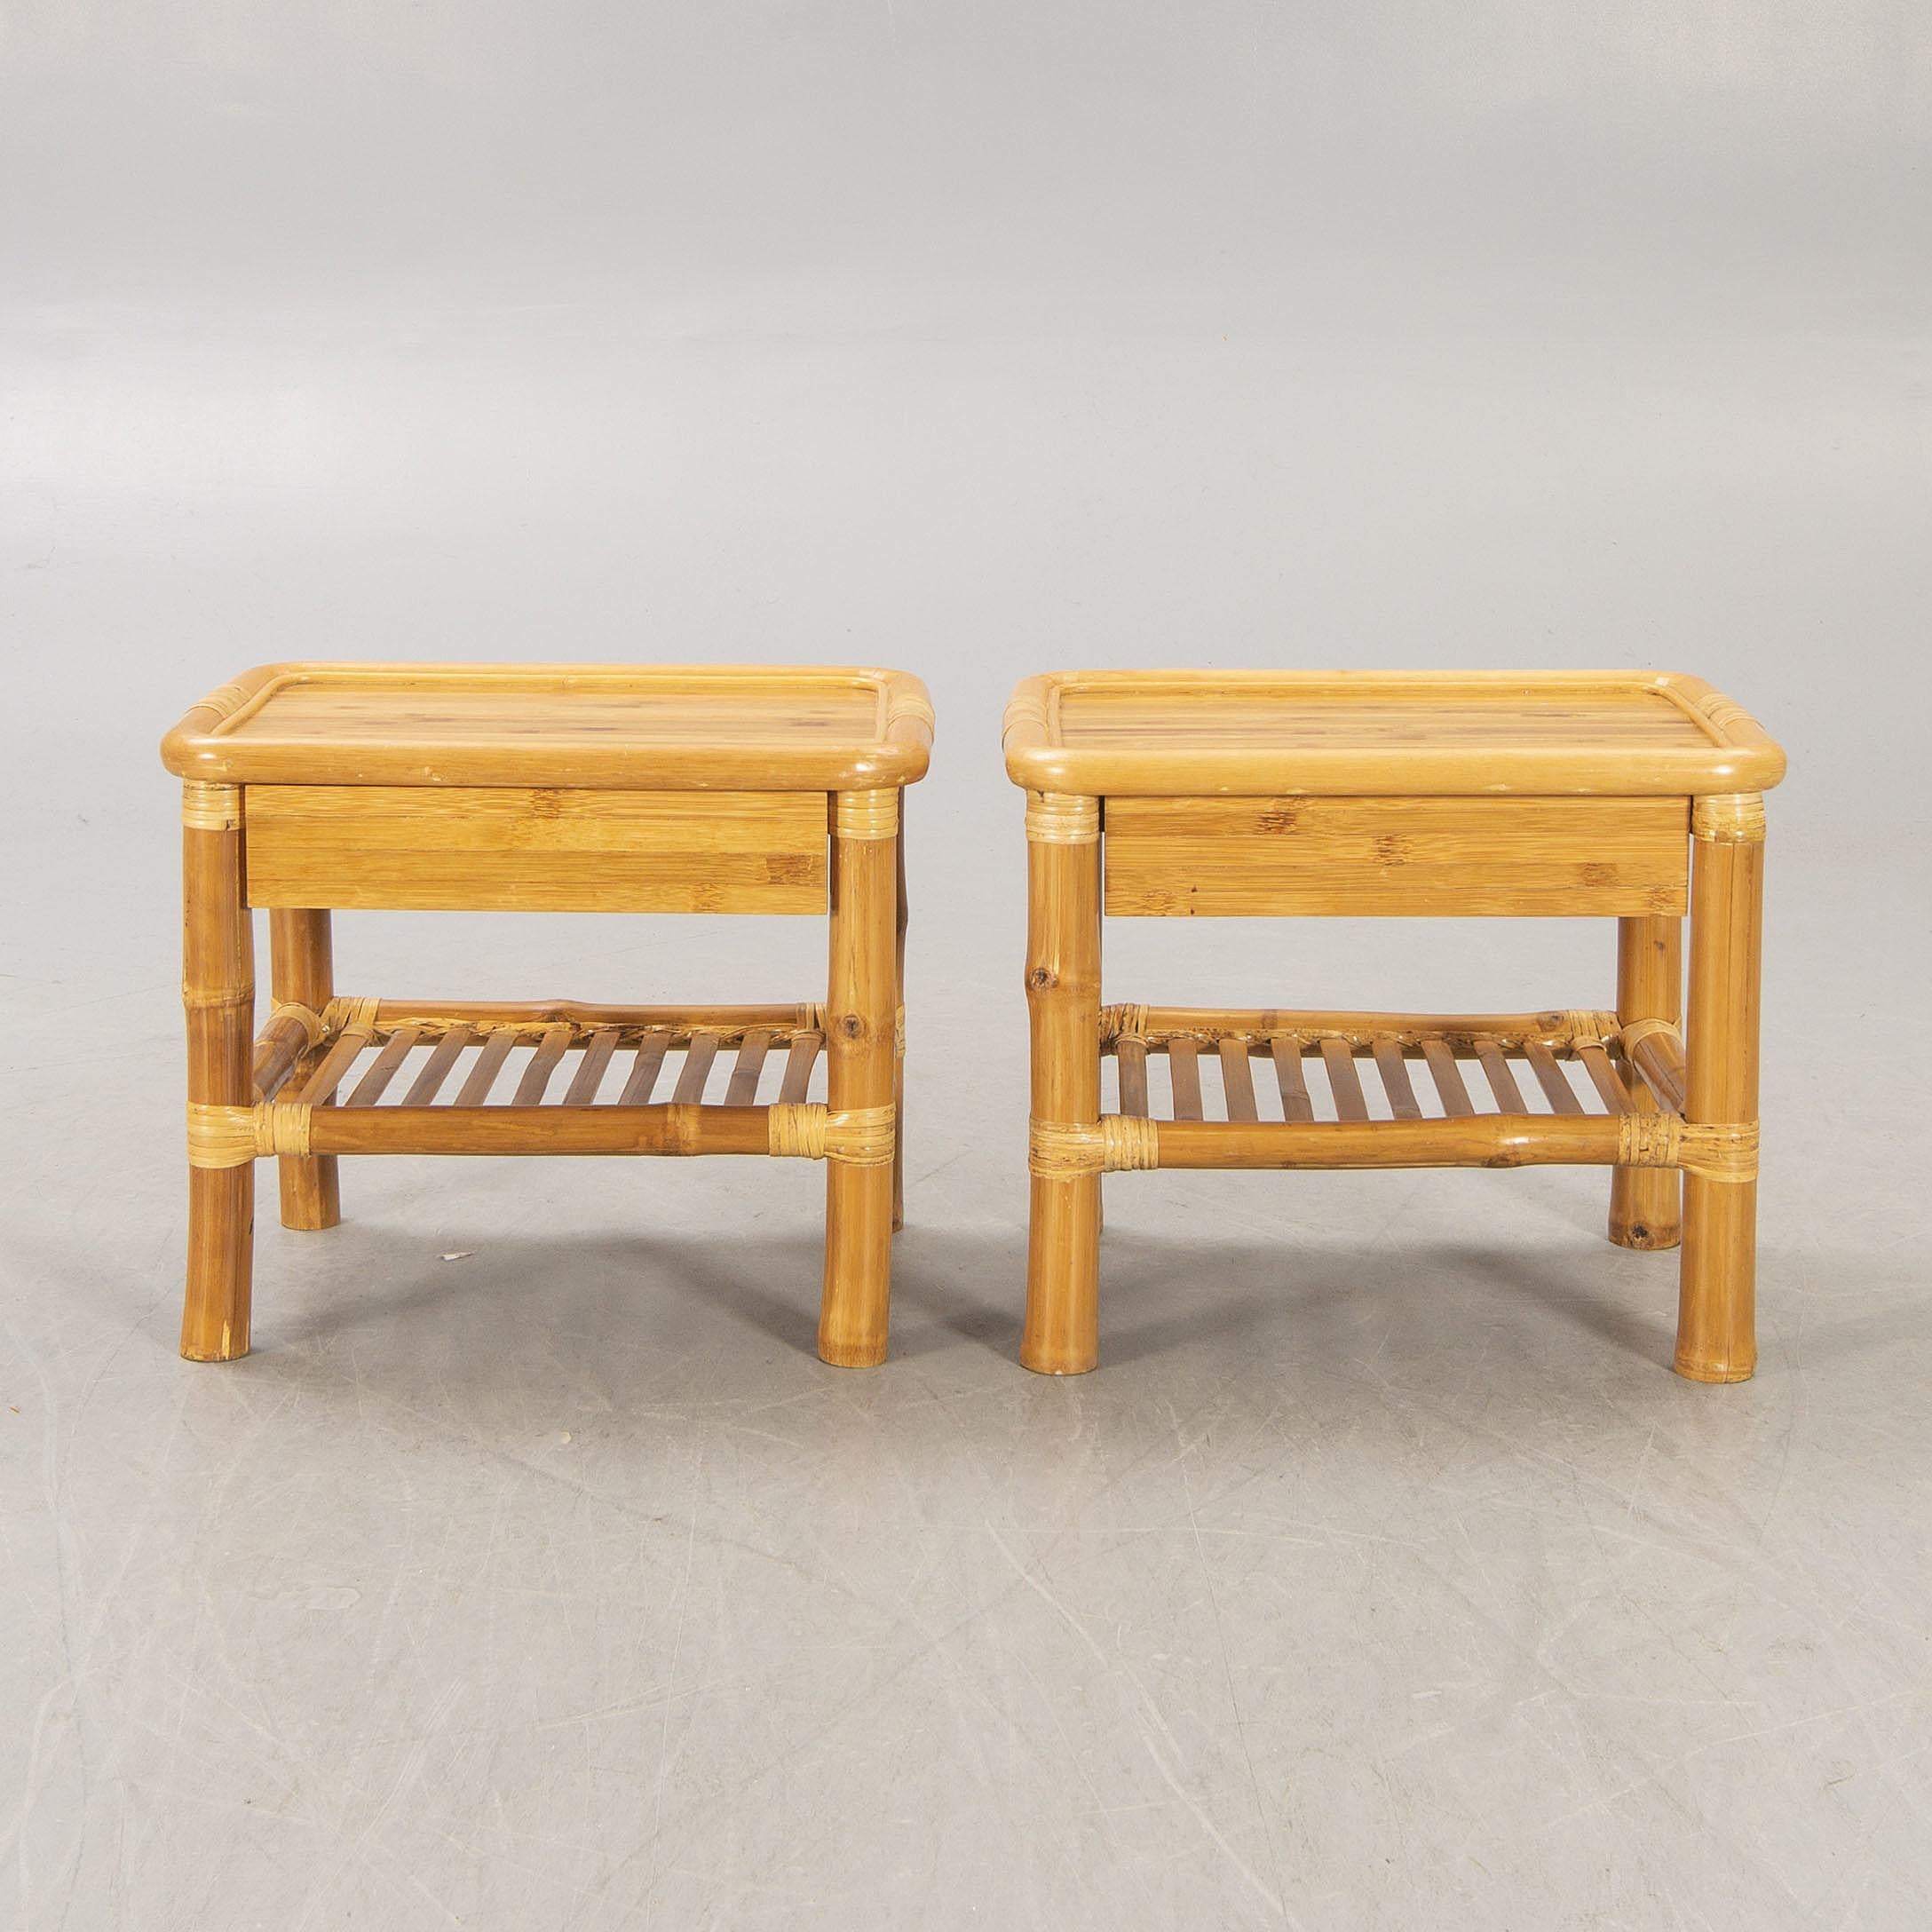 Bamboo and Wood Tables a Pair Probably by DUX, Sweden, 1960 In Good Condition For Sale In Paris, FR